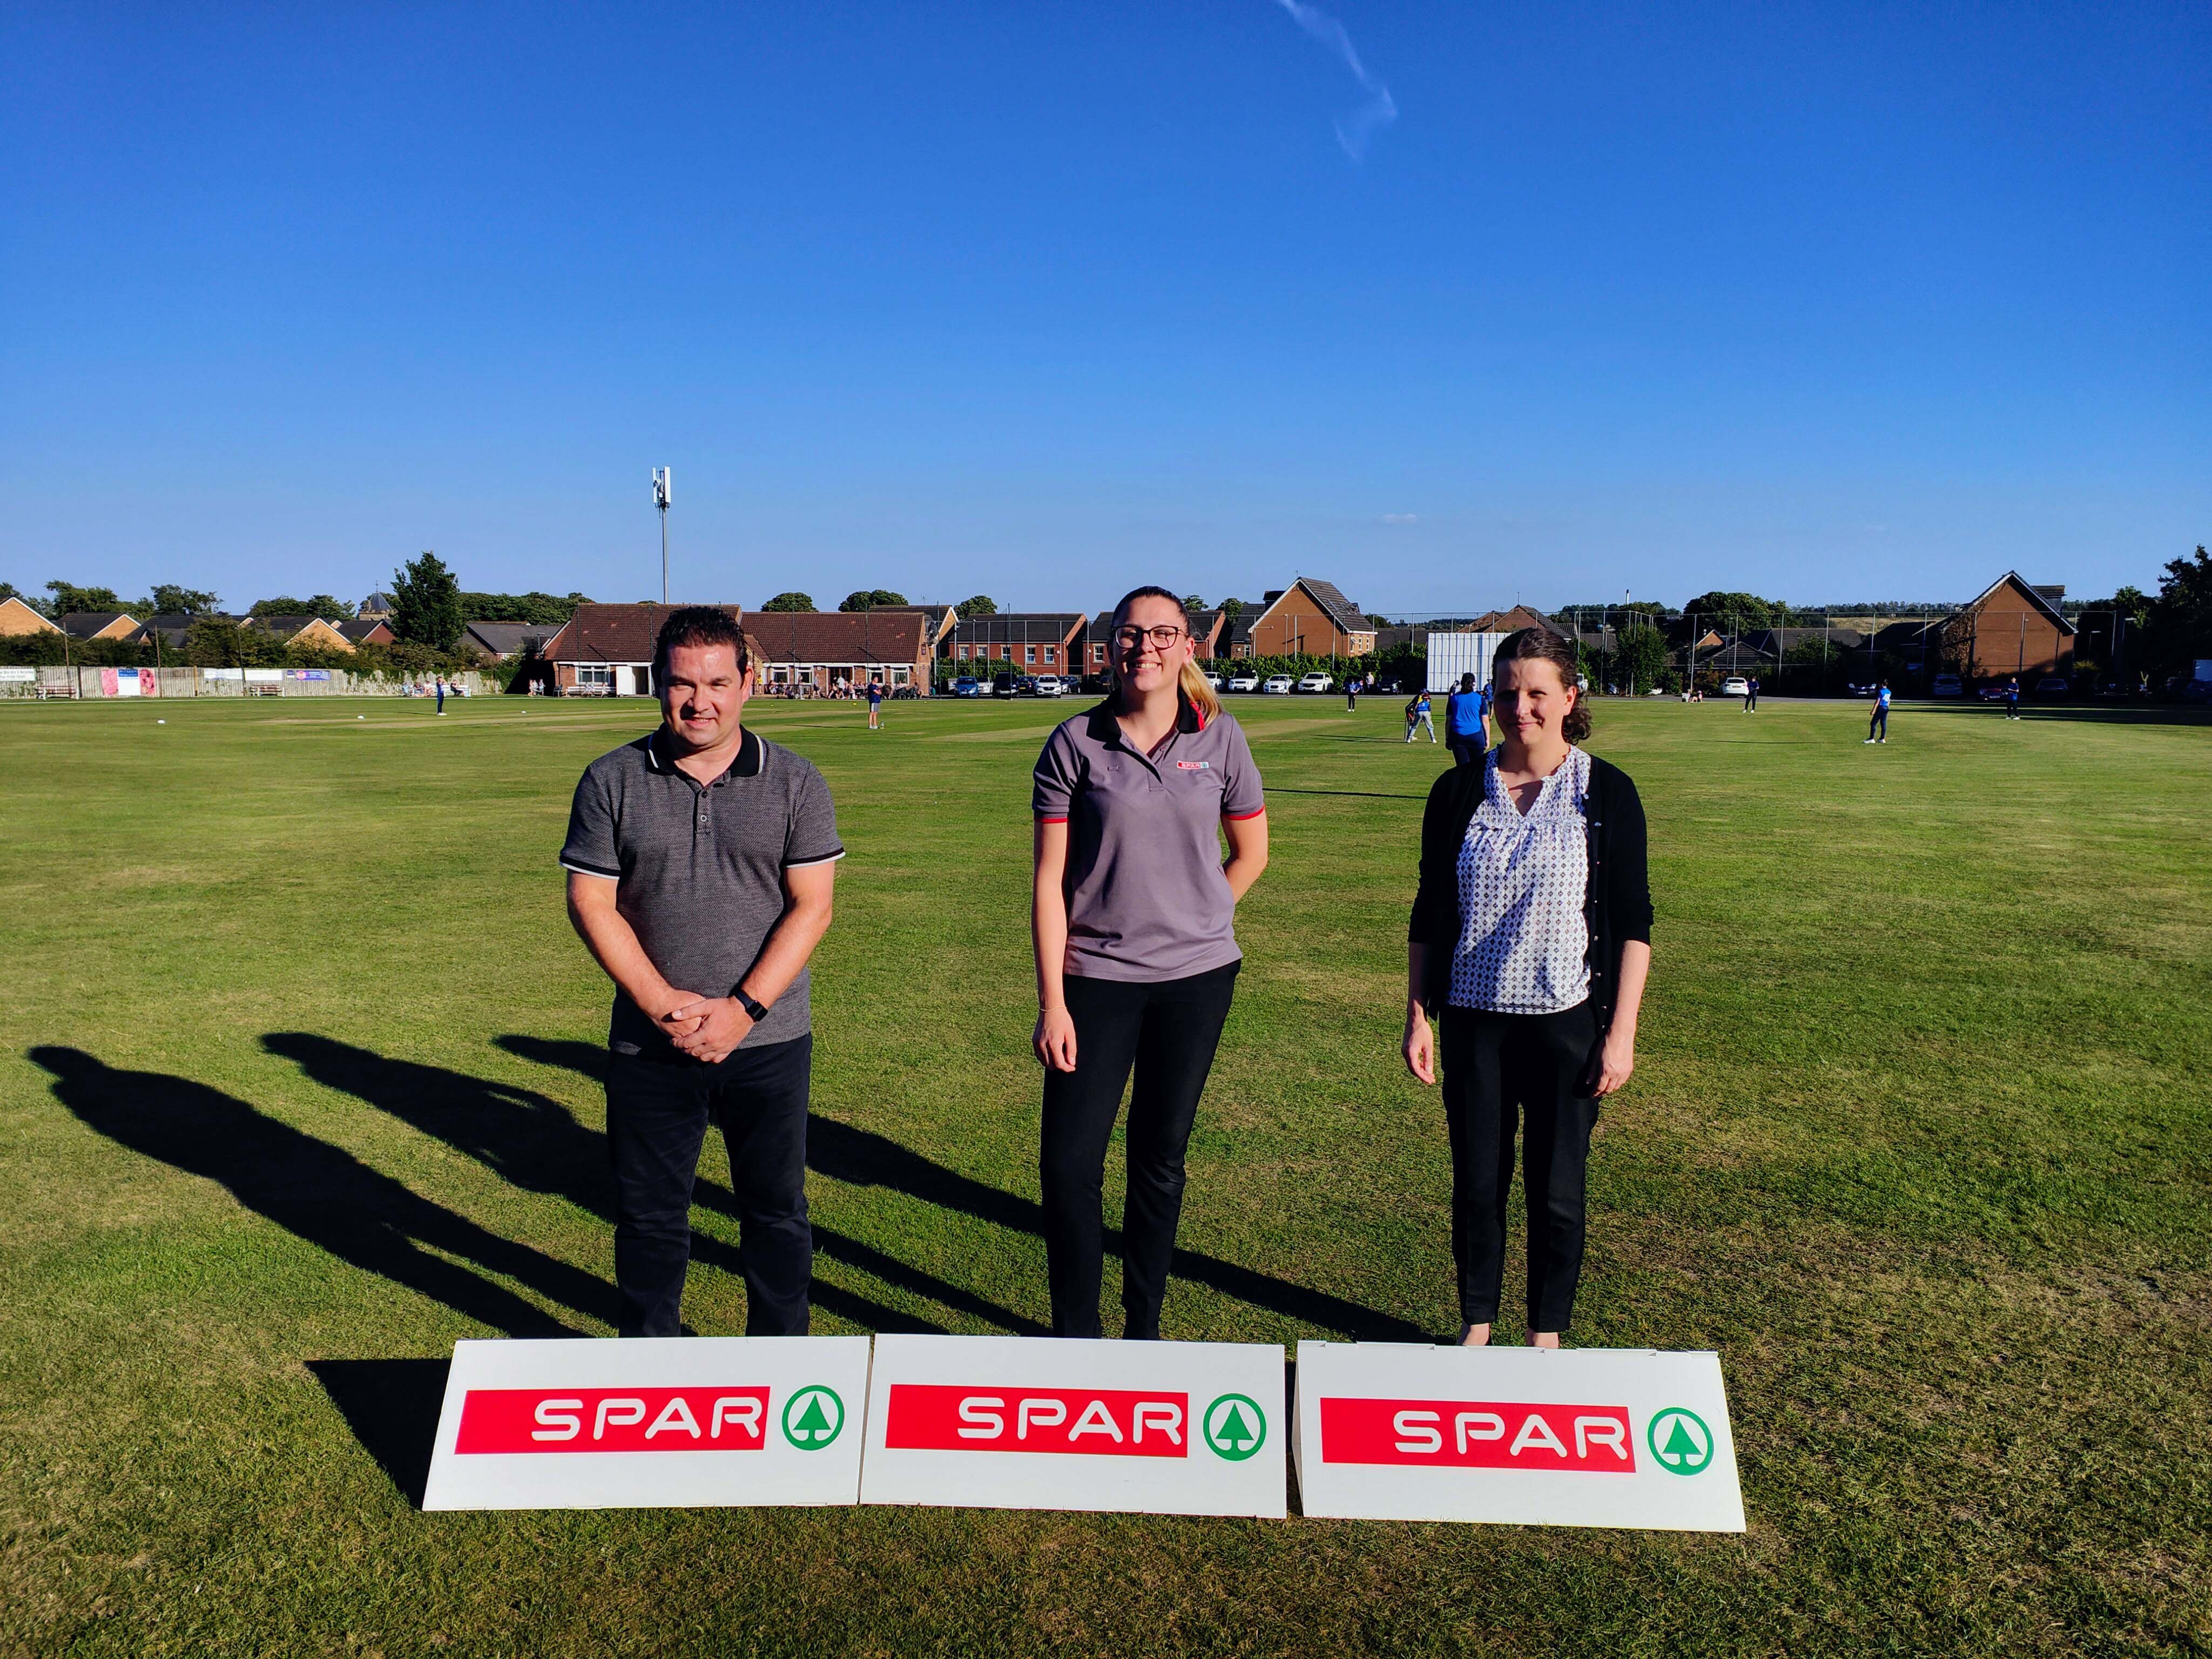 How’s that for community support? SPAR sponsors Willington Cricket Club and the town’s foodbank